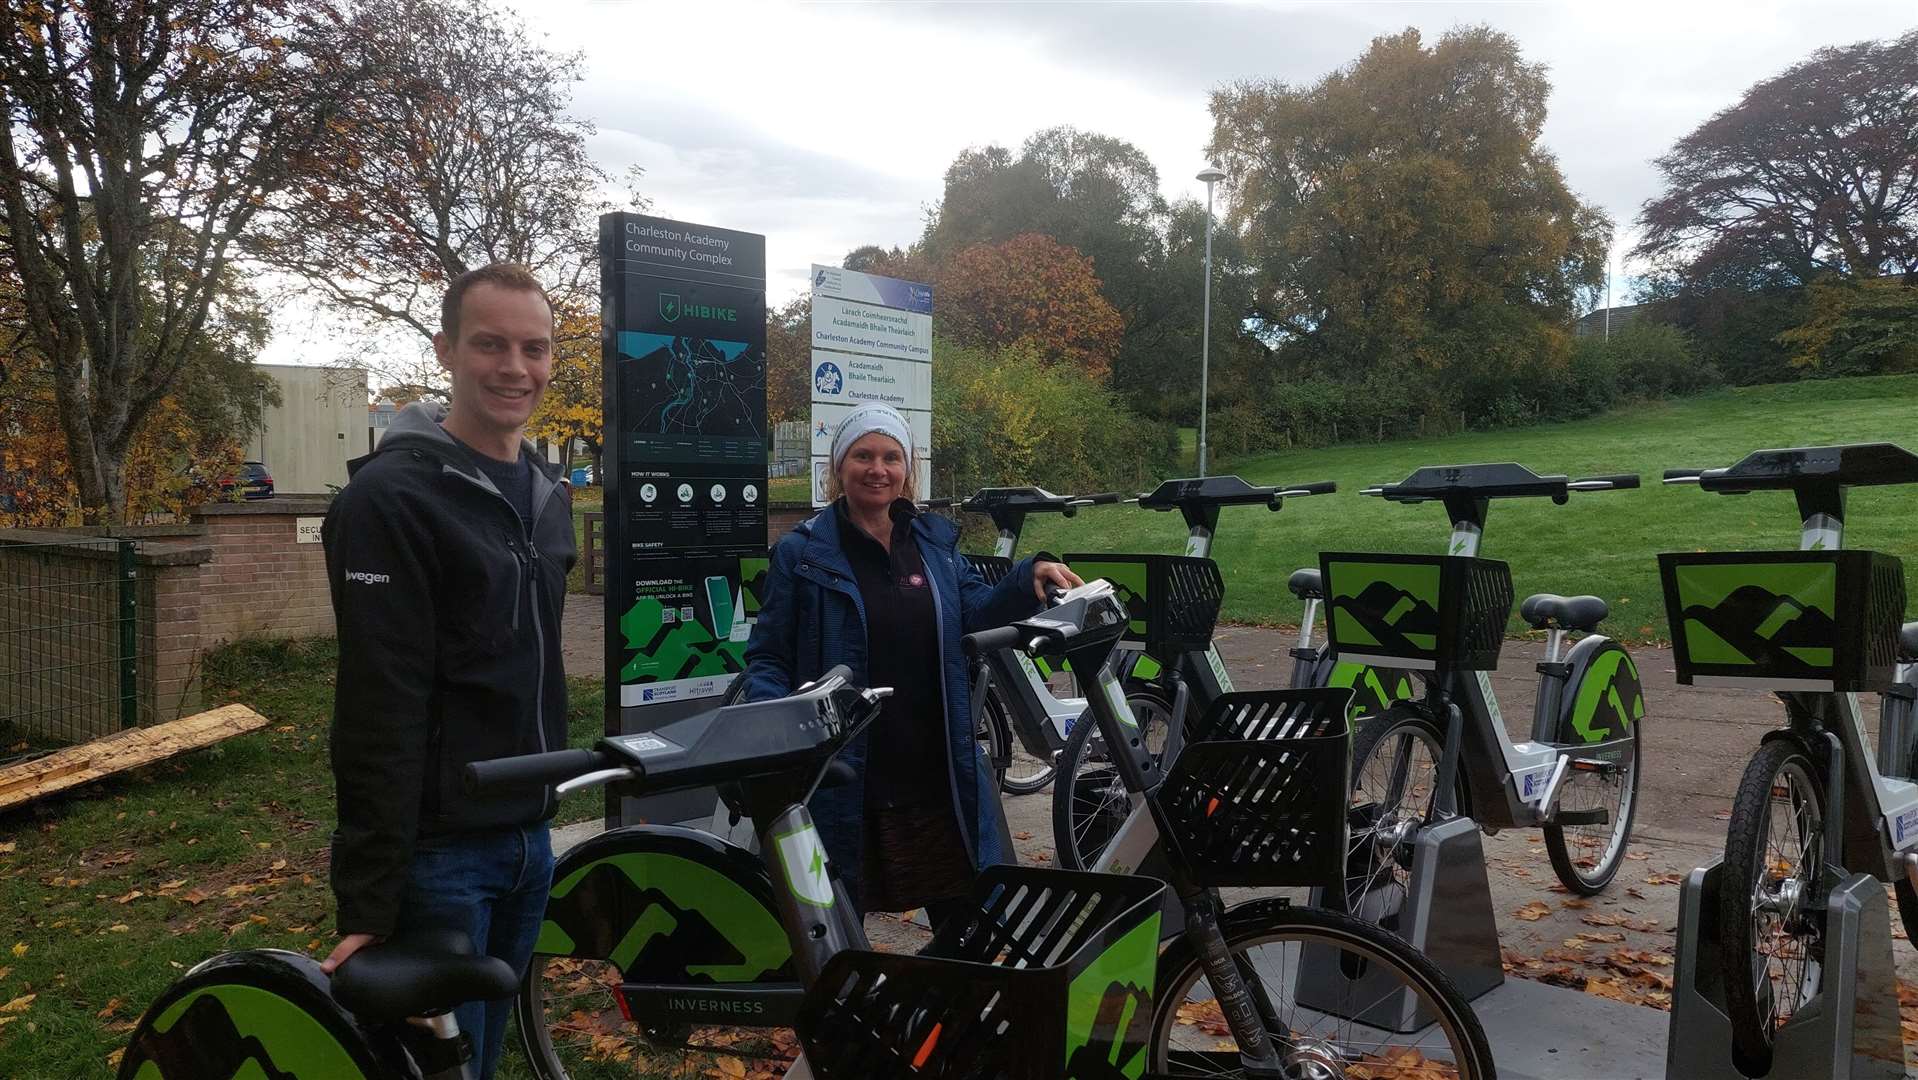 Rhys Roberts from Bewegen and Vicky Trelford, Active Travel officer for HitTrans.